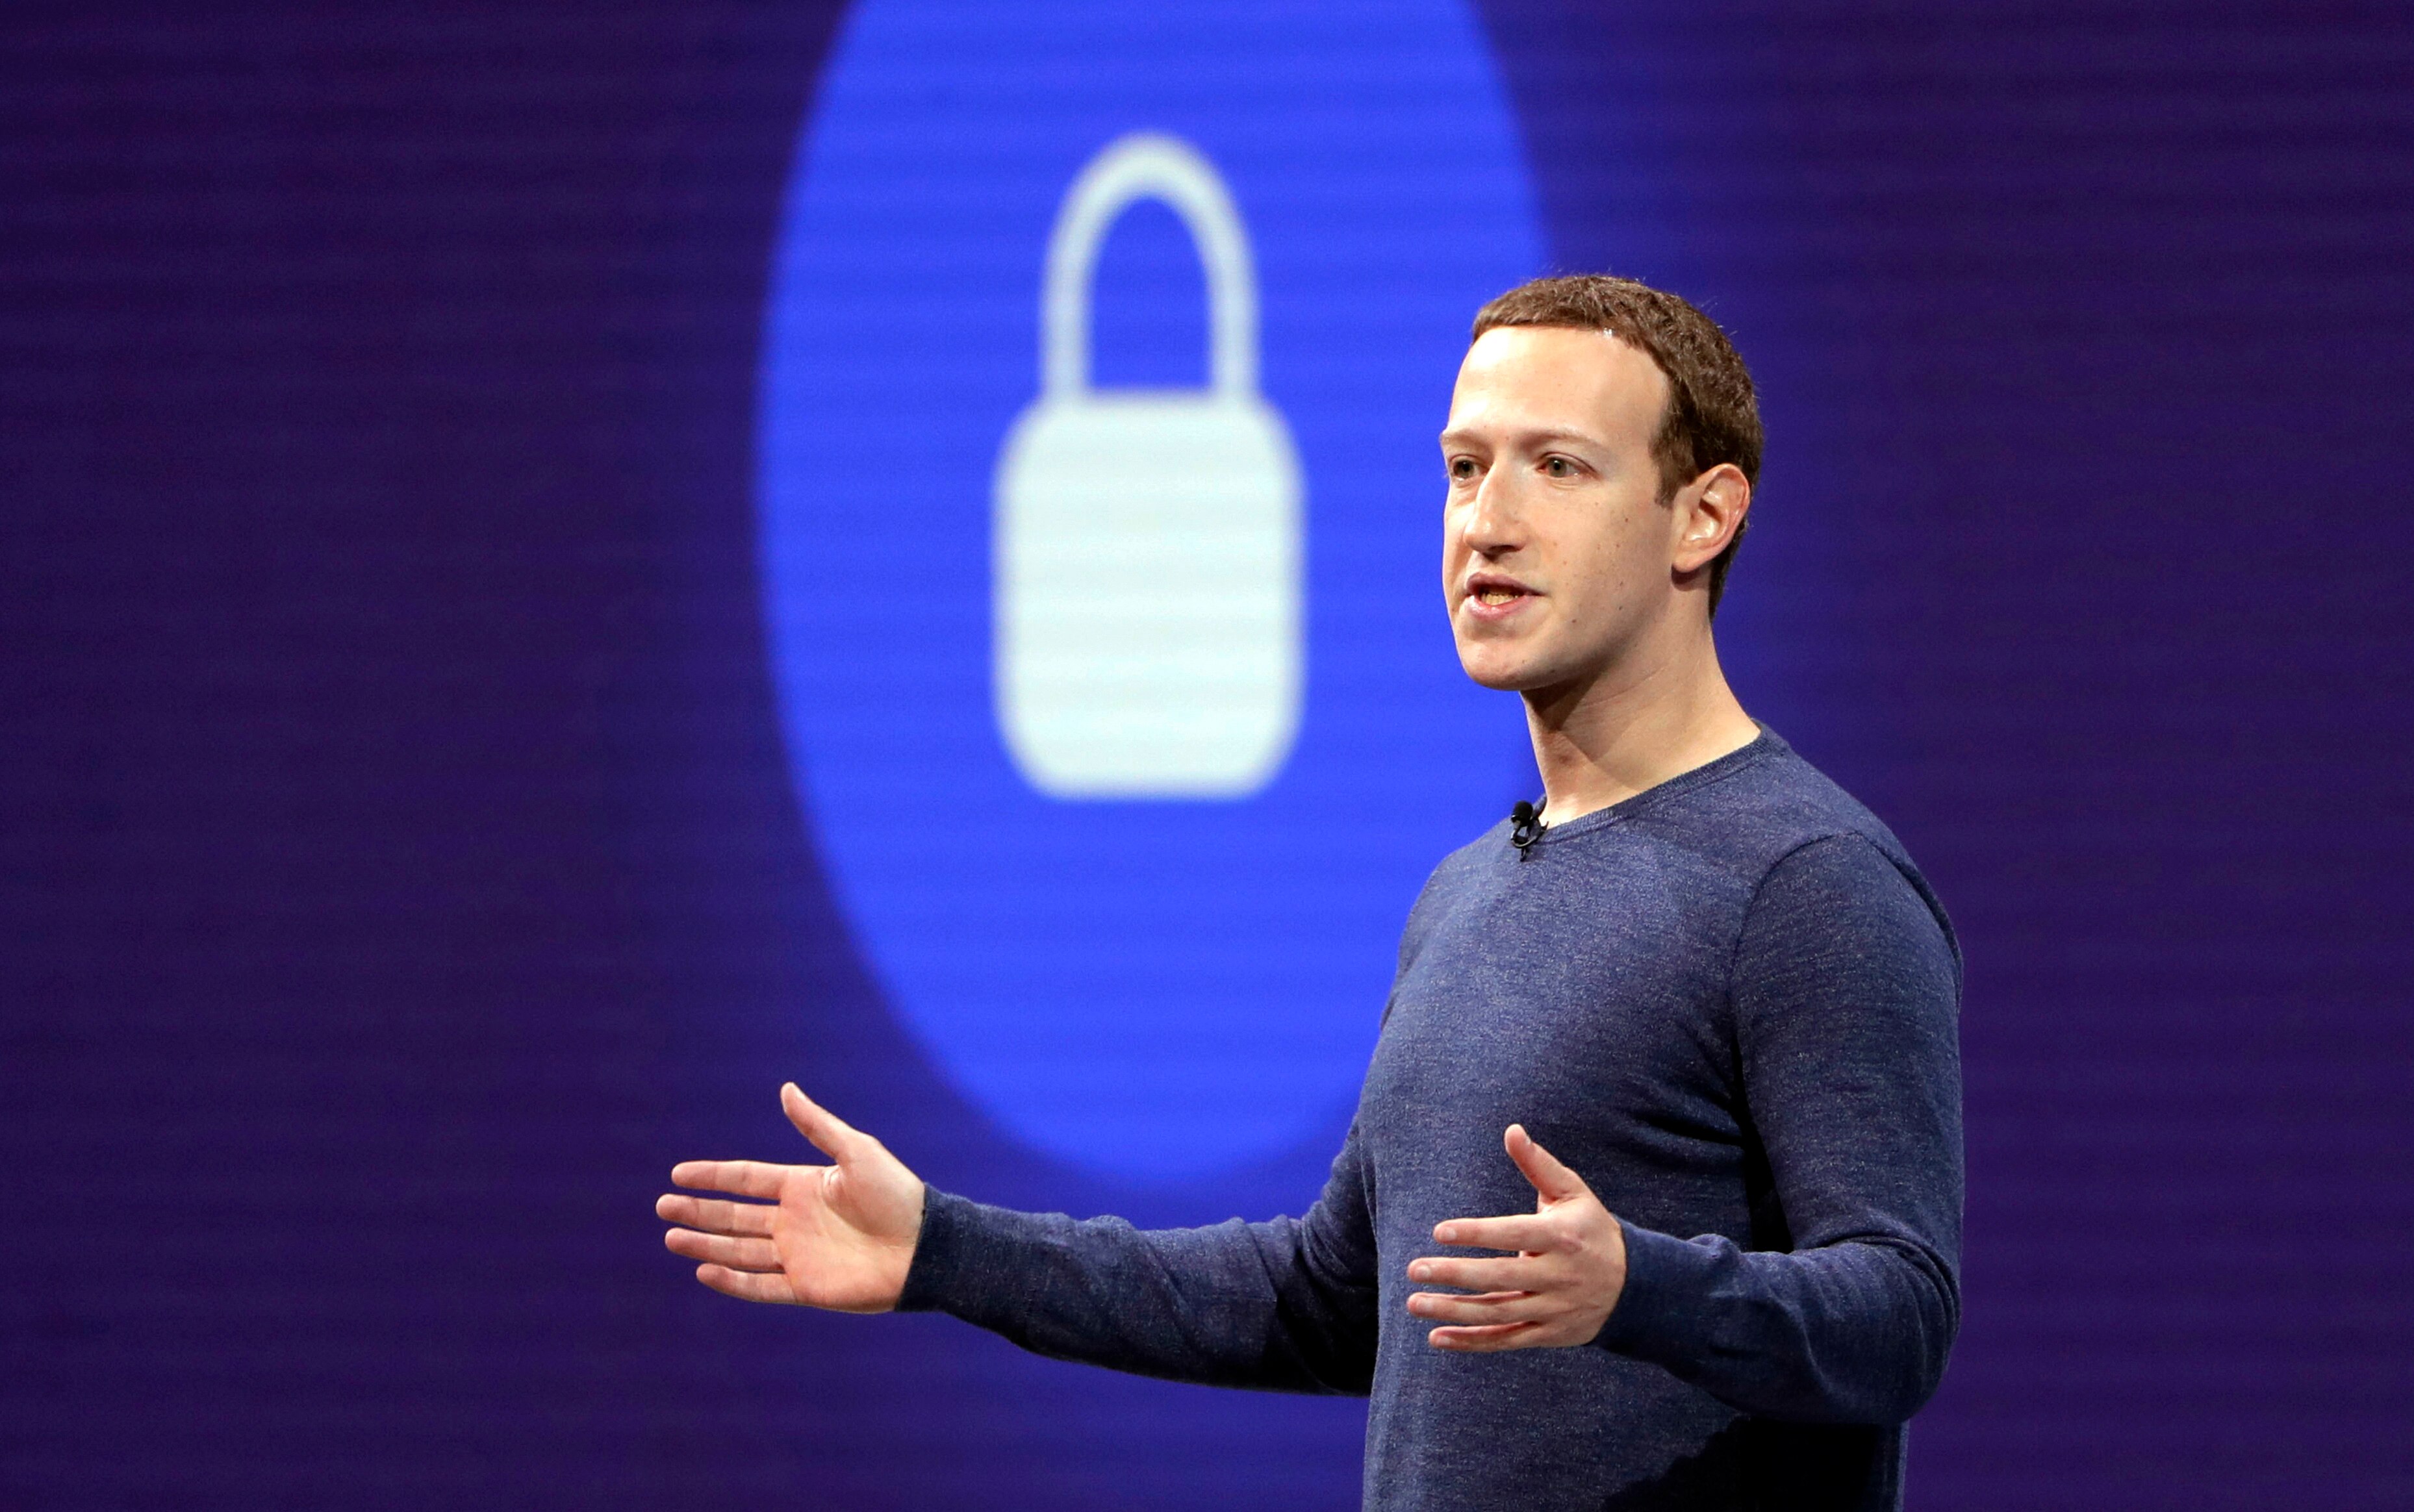 Mark Zuckerberg, chairman and CEO of Facebook has announced the rebranding of his platform under a new name "meta" to help build ta next chapter he announced in a keynote.